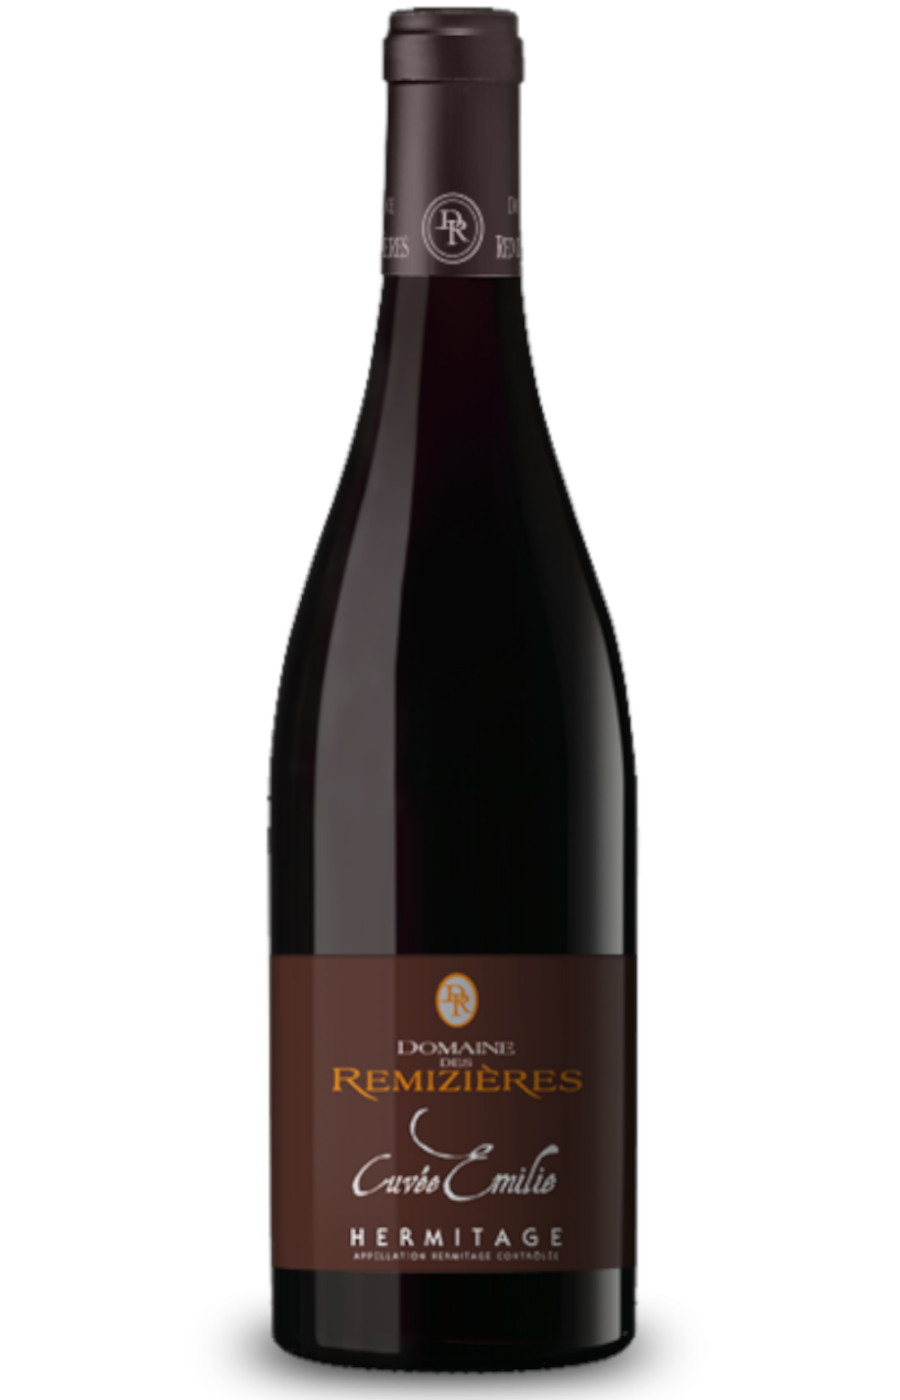 Hermitage rouge Les Remizieres